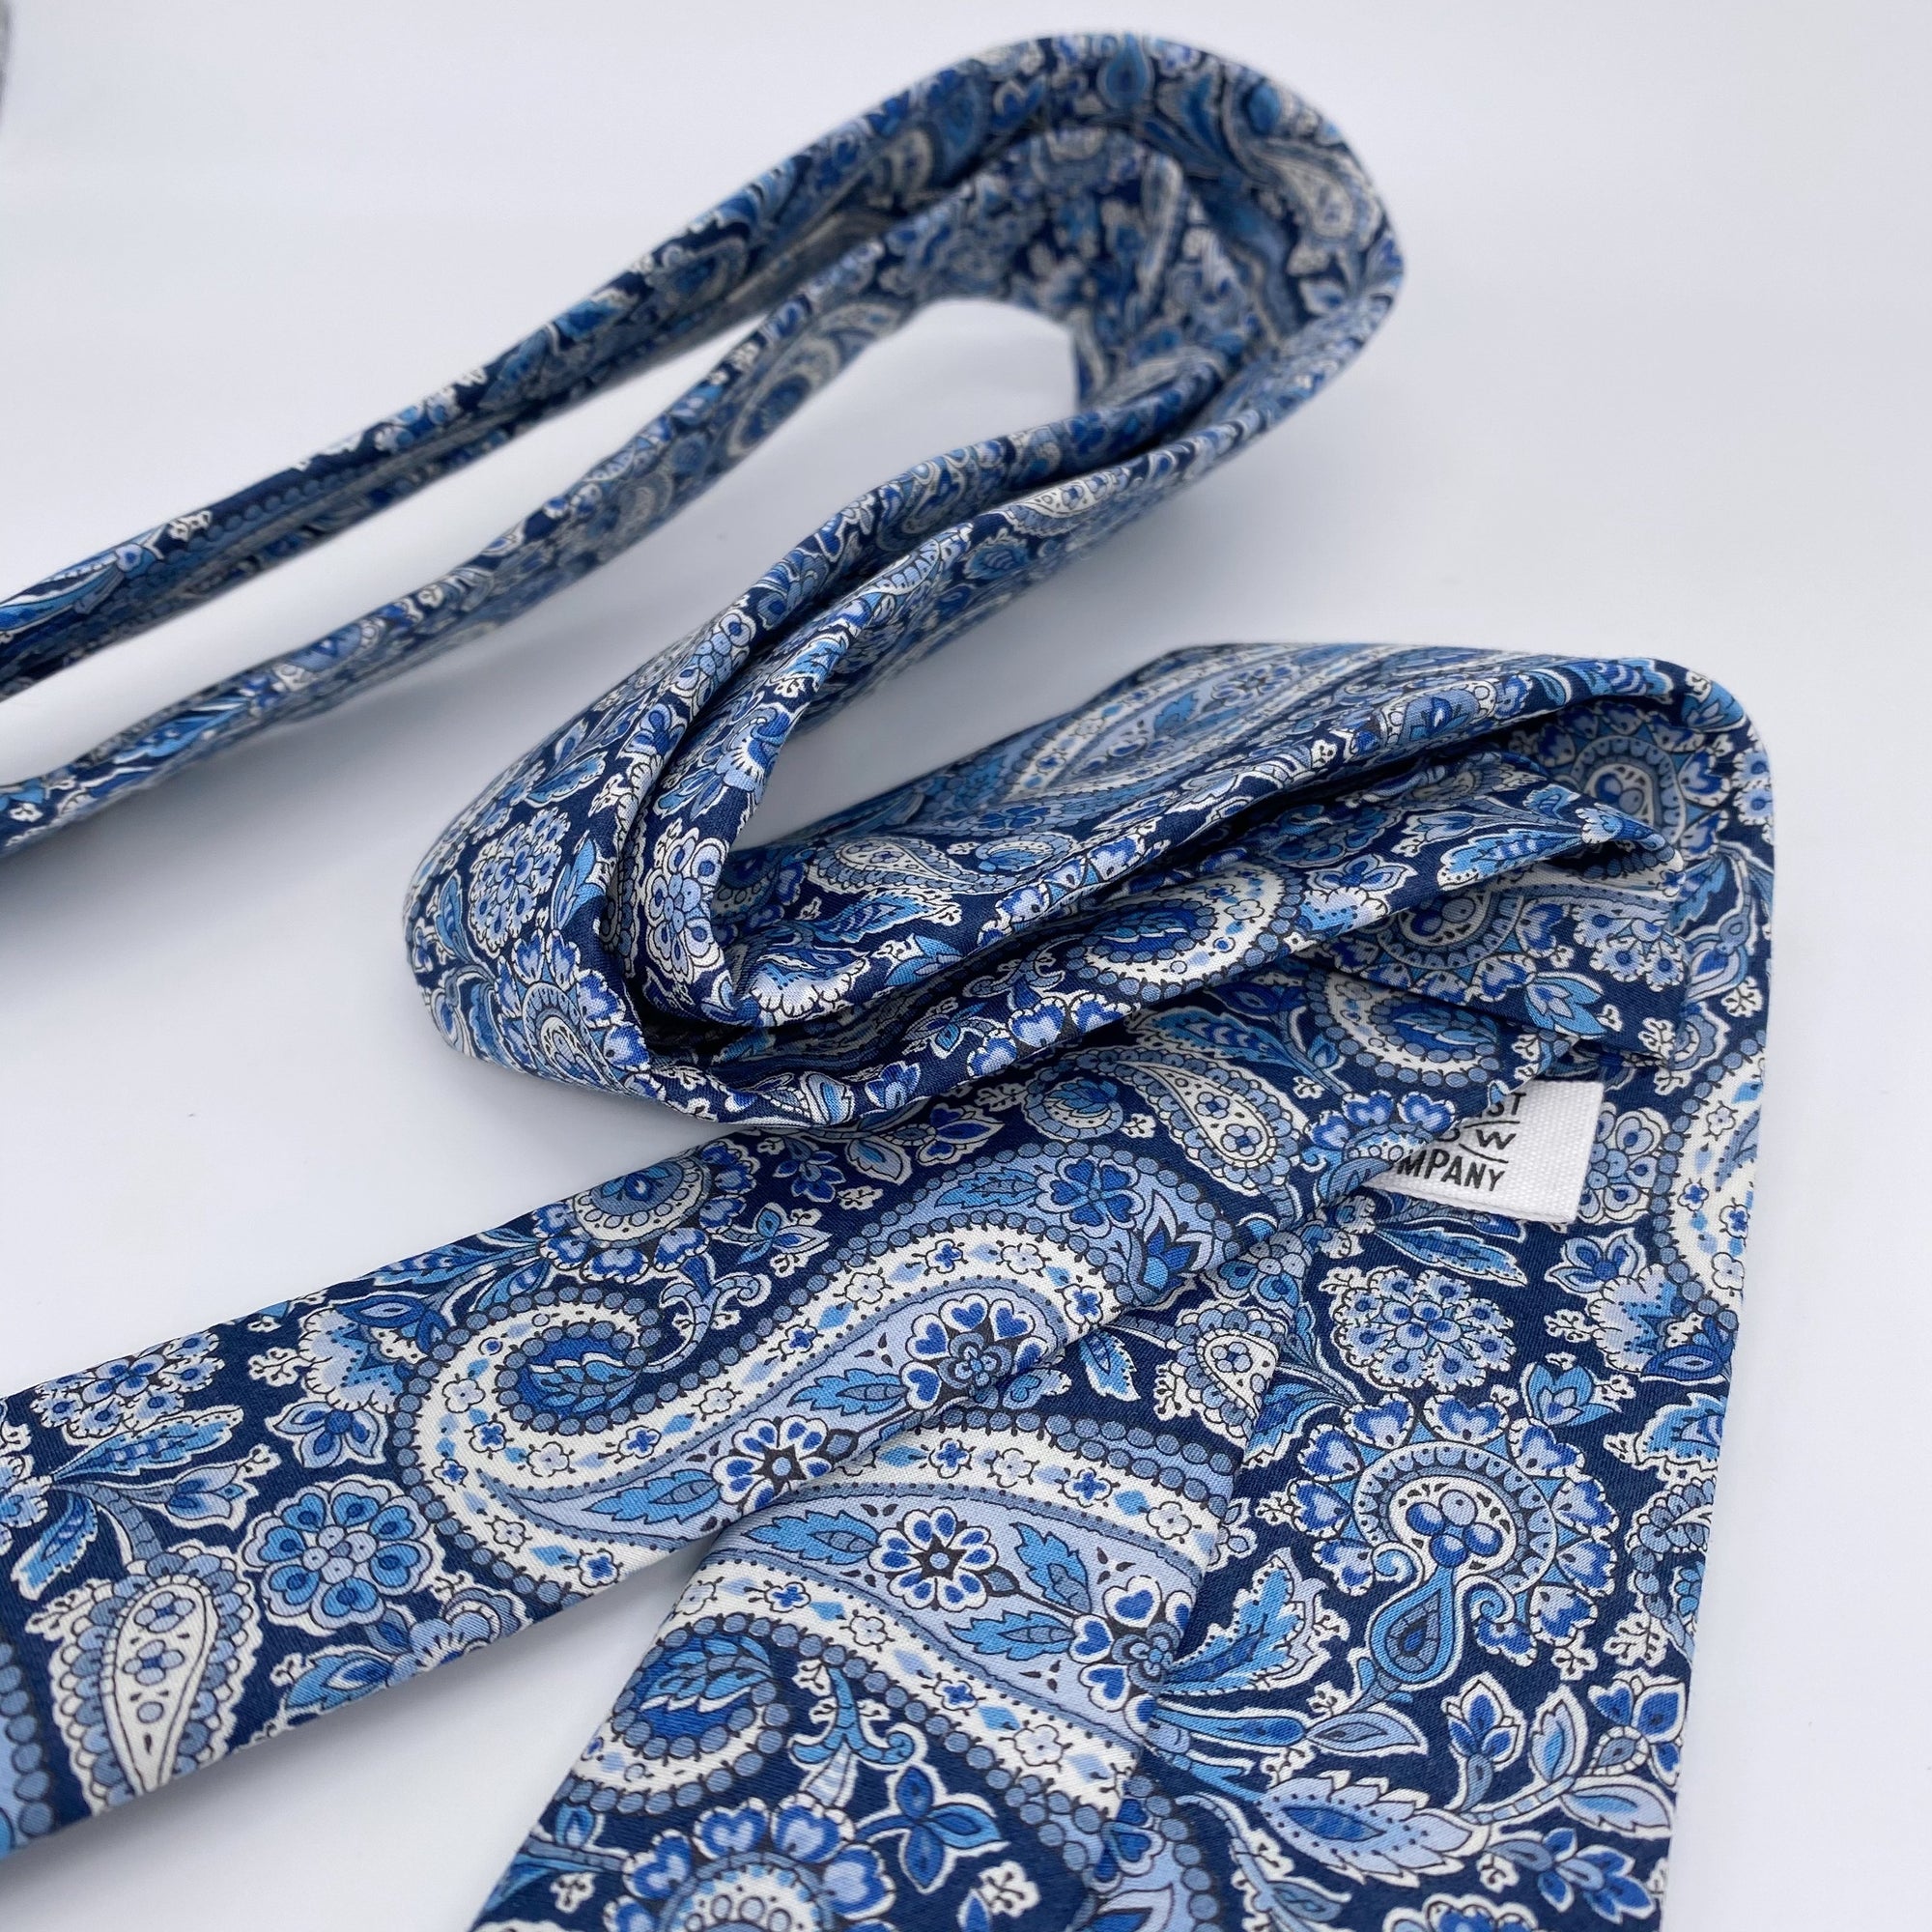 Liberty of London Tie in Navy Paisley